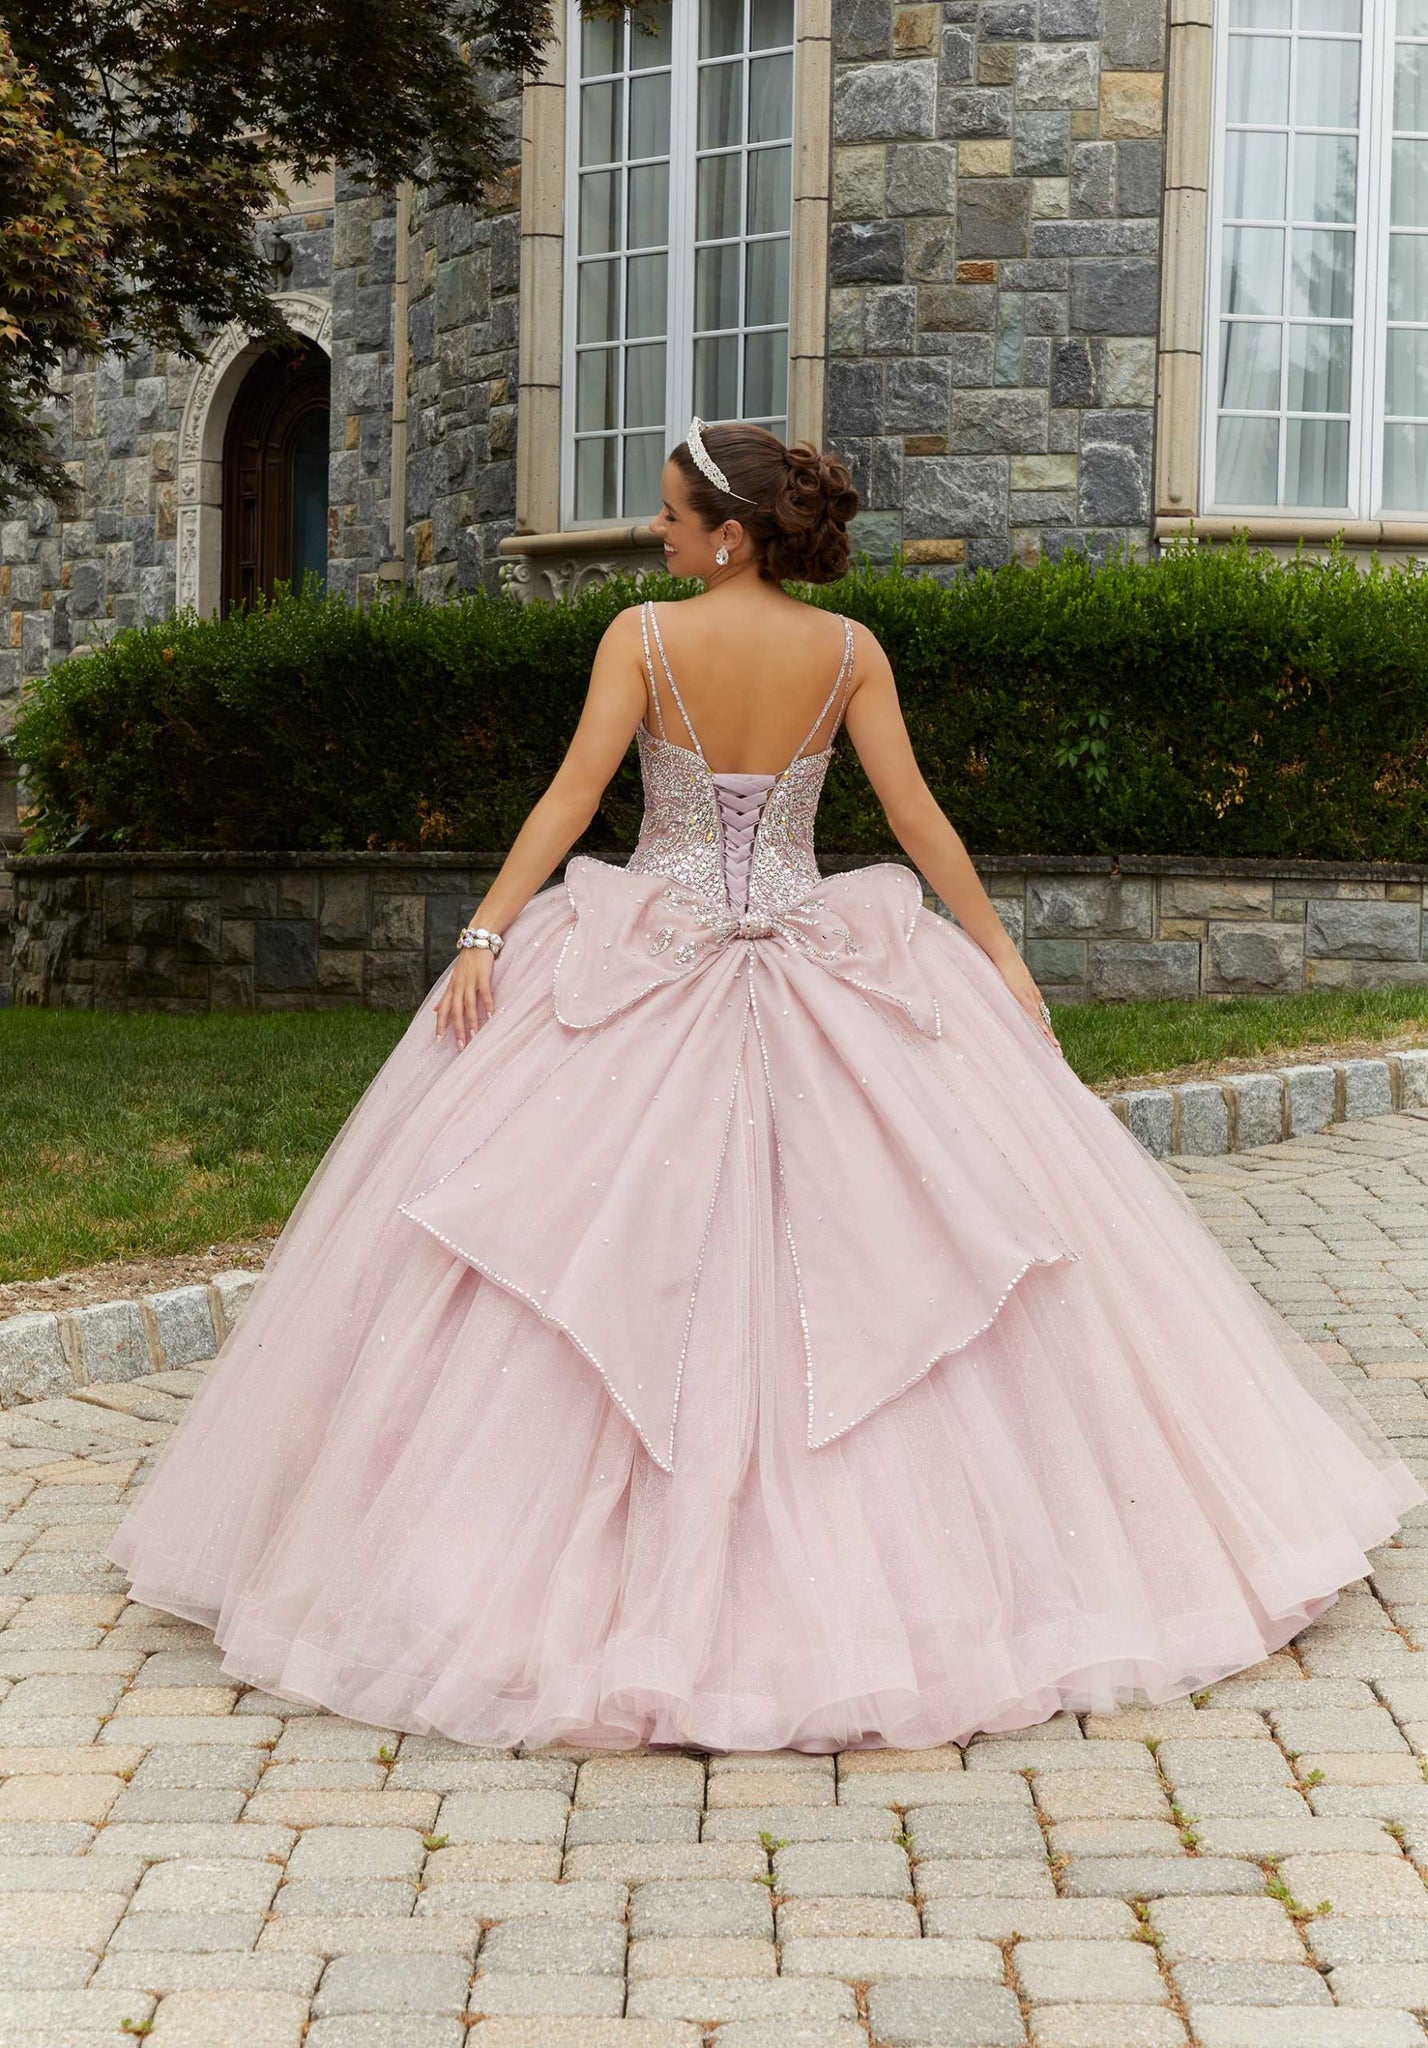 Rhinestone and Crystal Beaded Quinceañera Dress with Bow